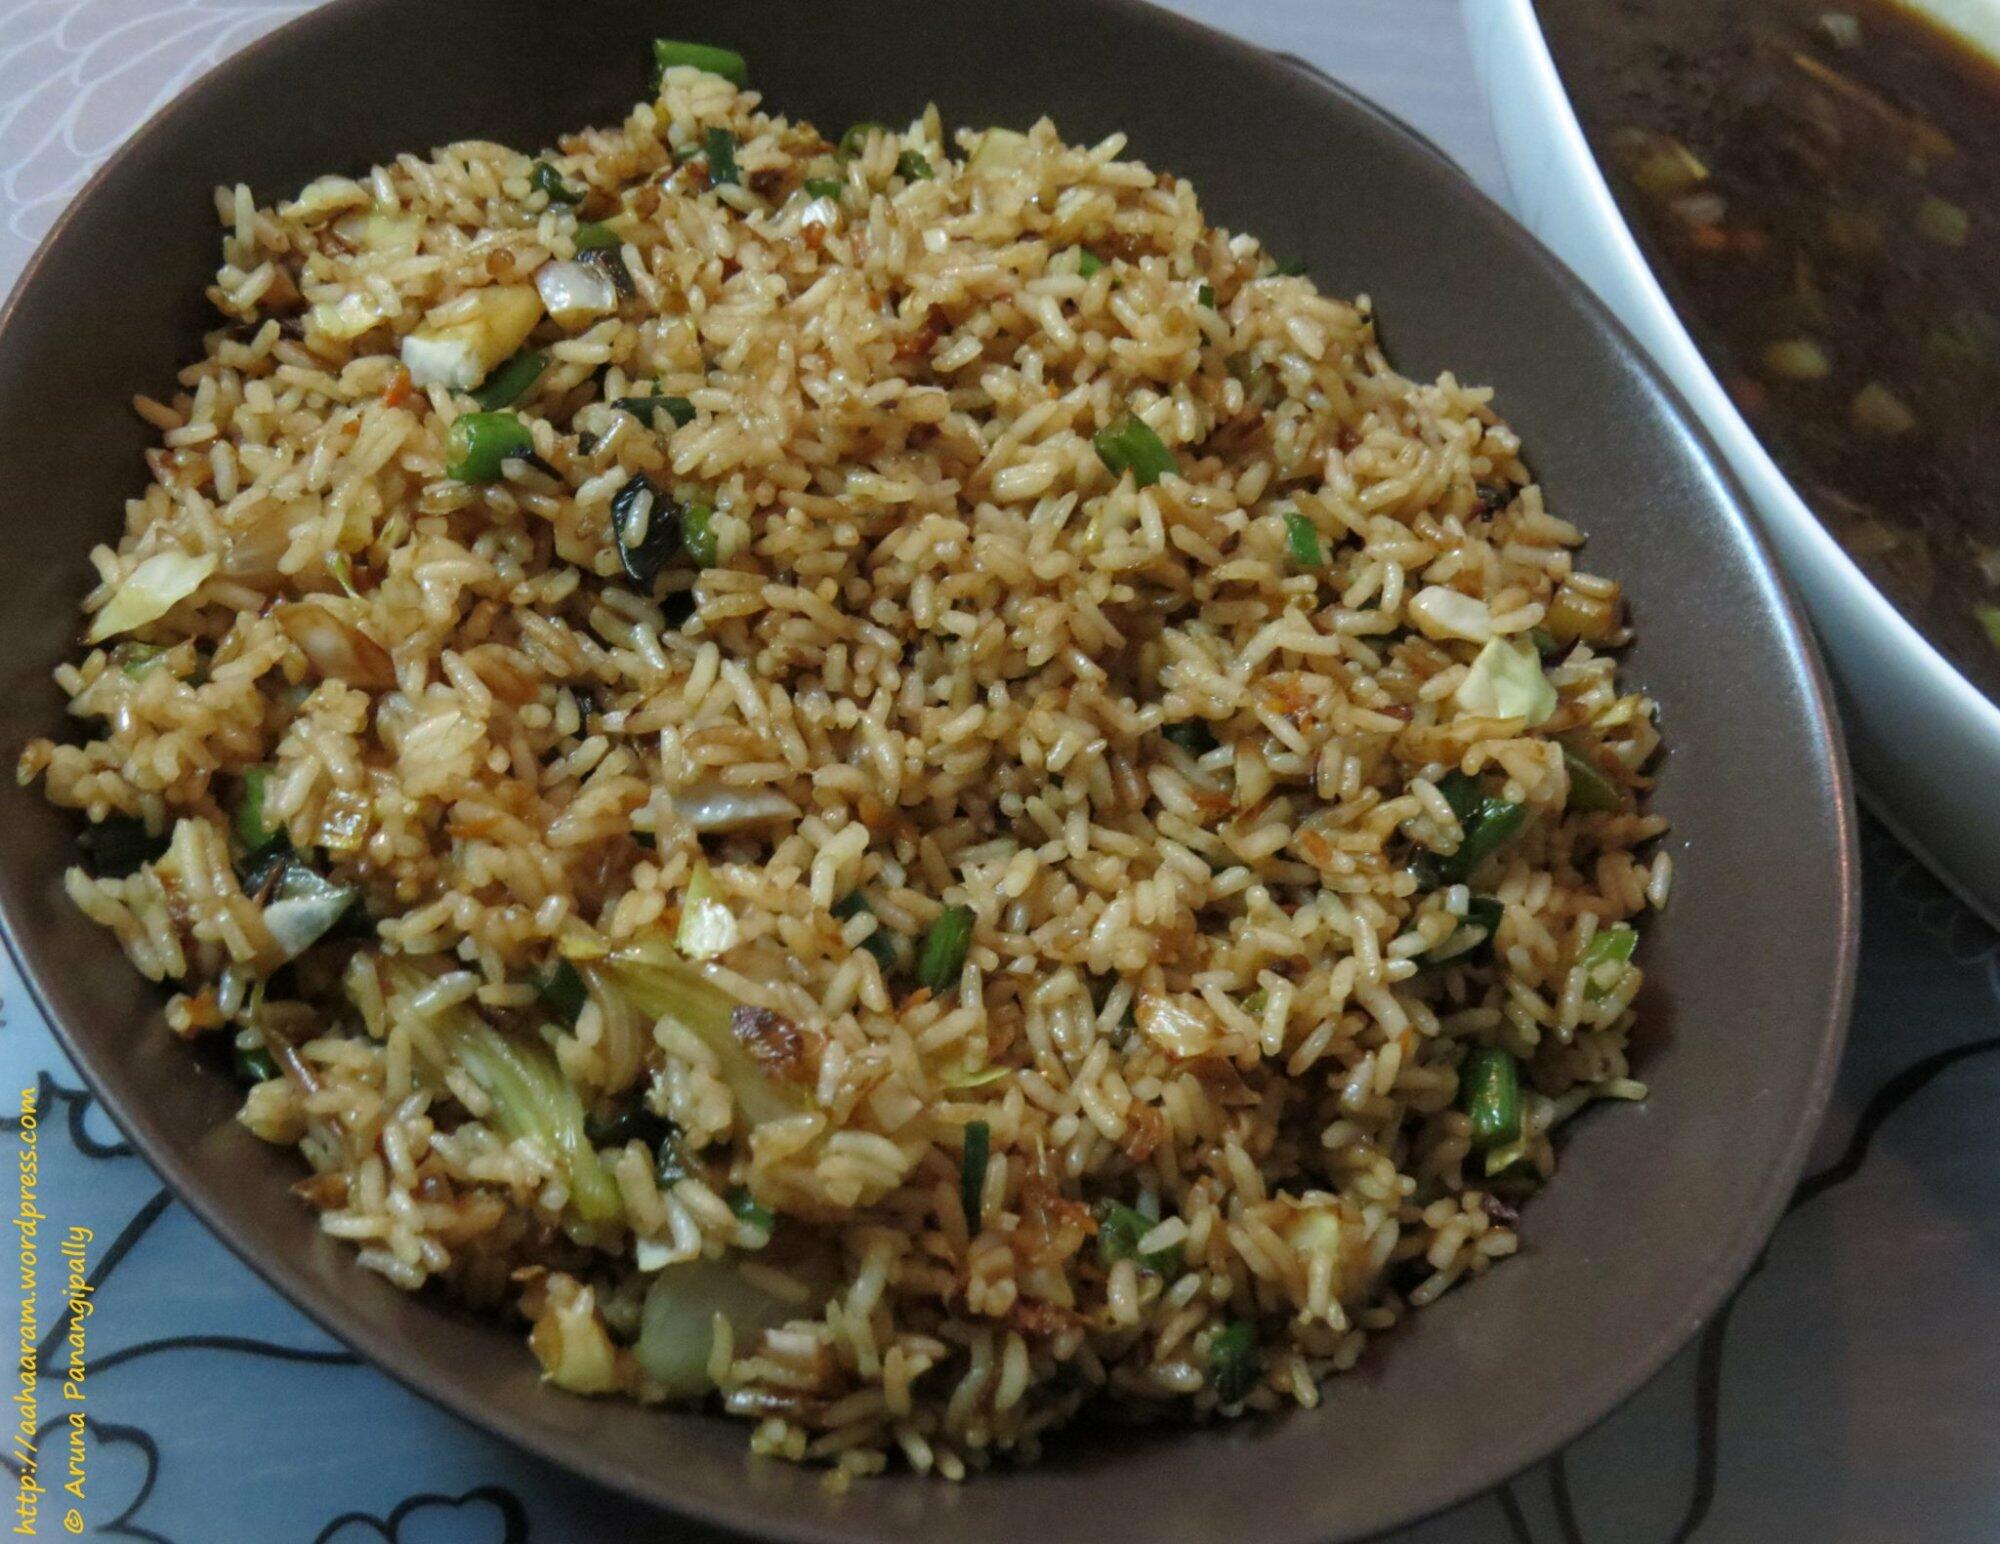 Vegetable Fried Rice is a popular Indo-Chinese delicacy